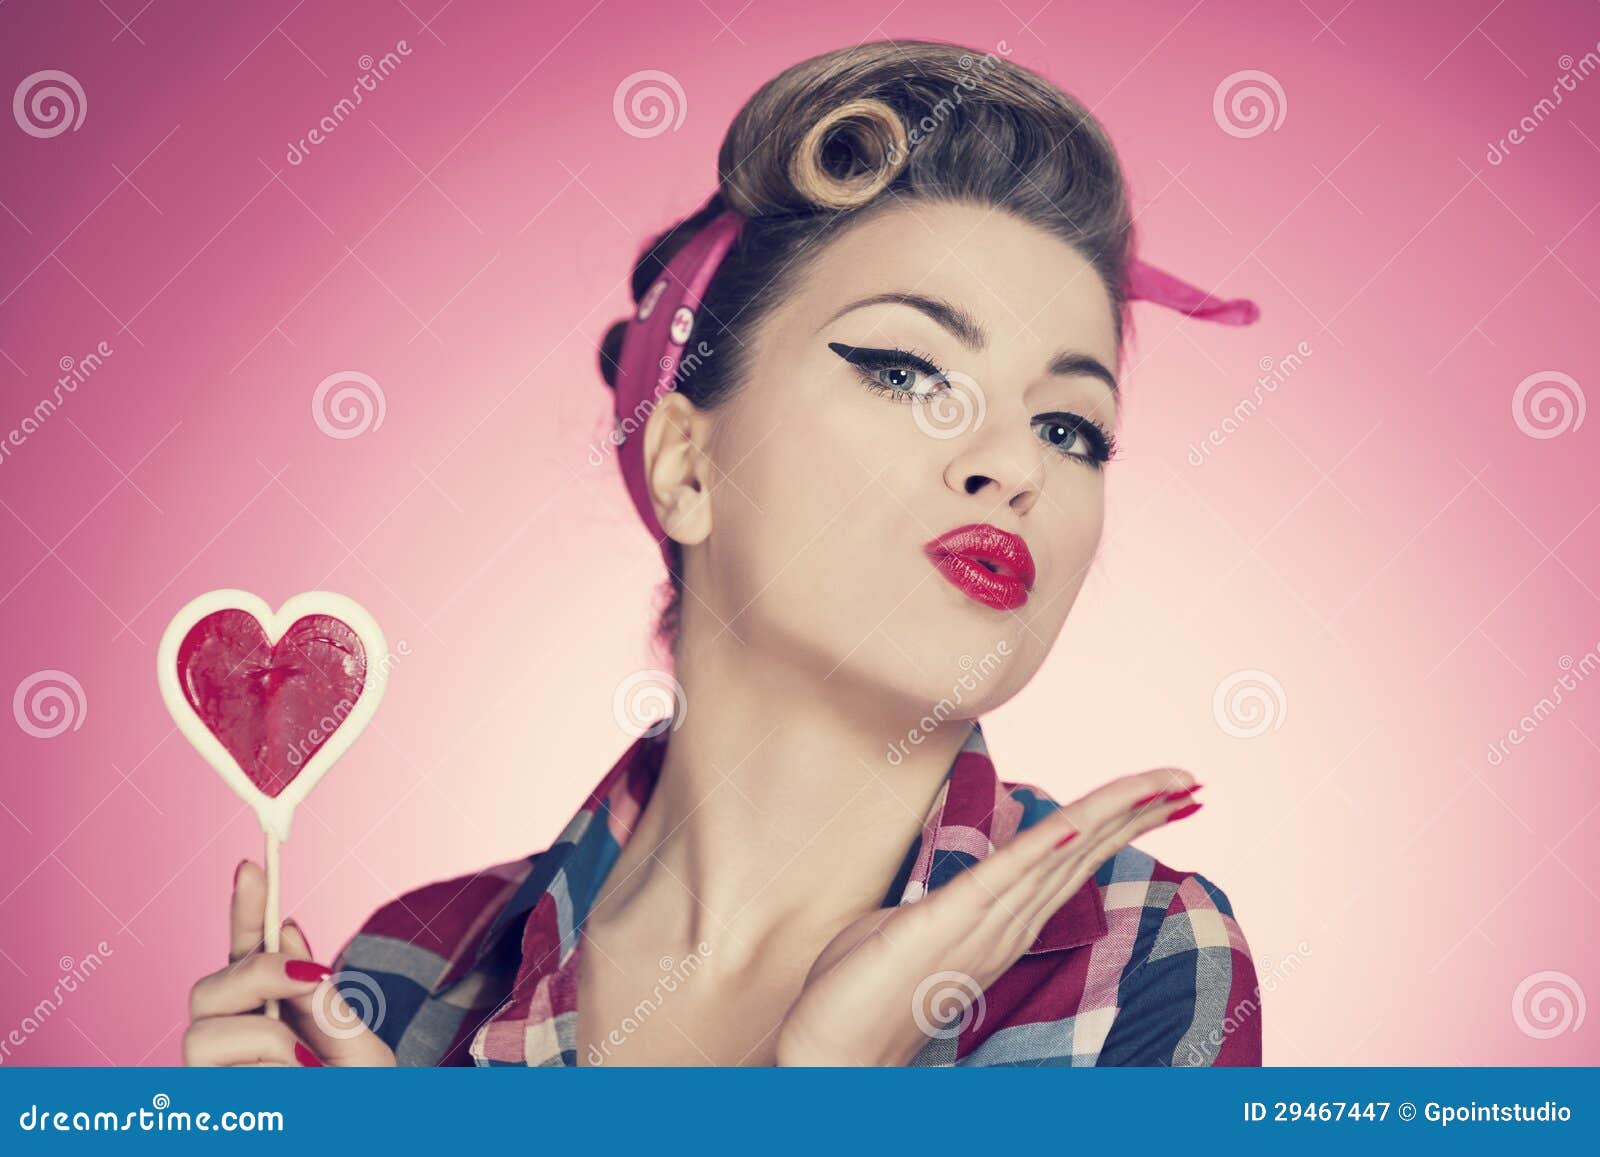 Valentine photo of young girl in pin containing health, girl, and